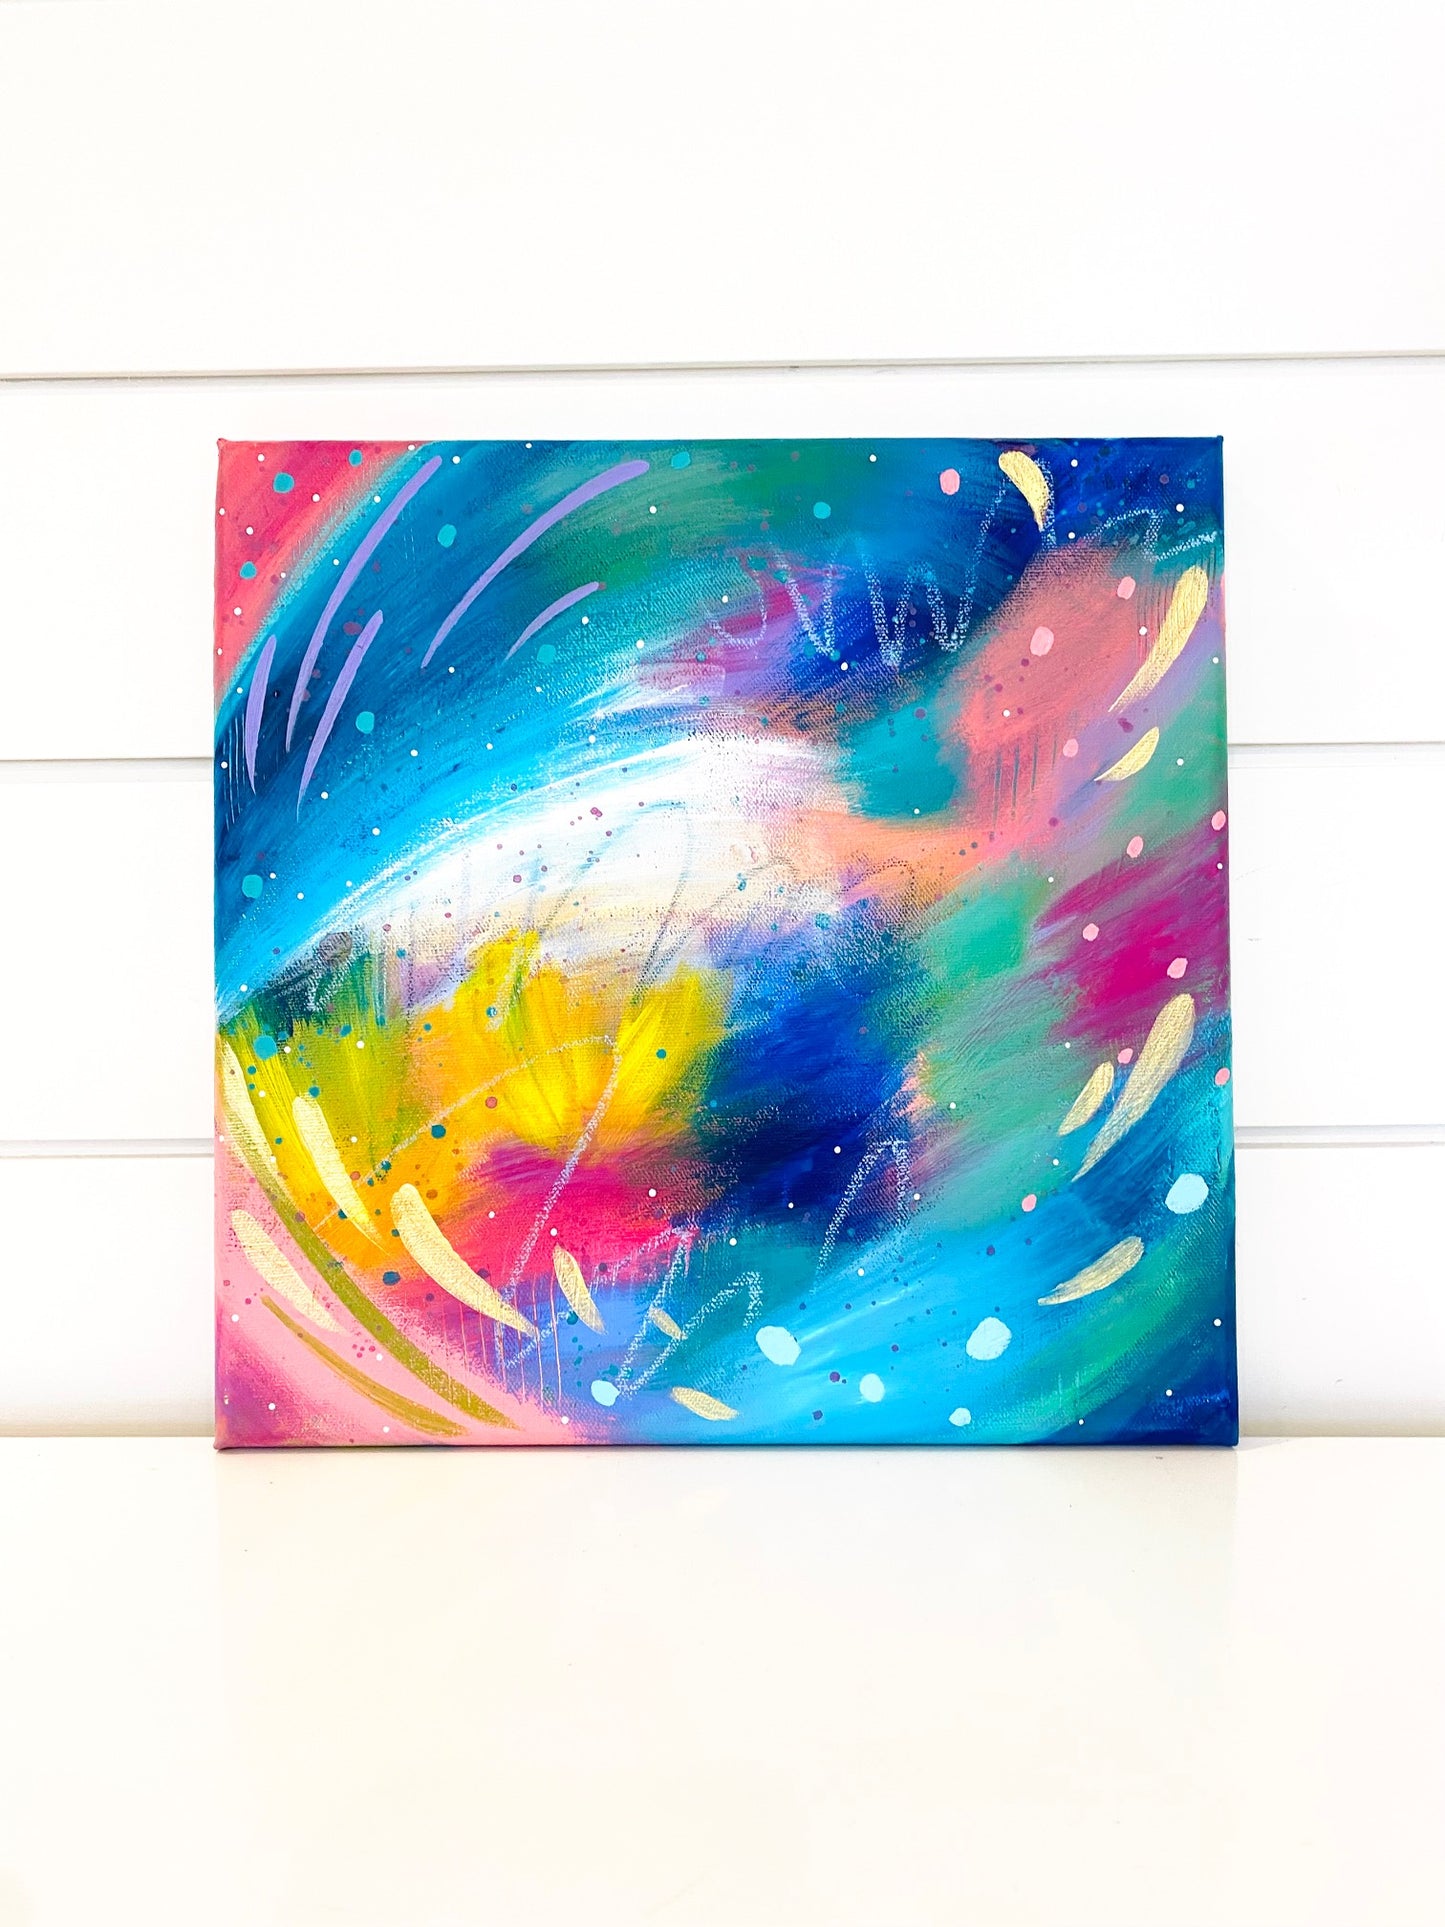 Abstract Original Painting "Confetti Colors" 12x12 inch Canvas